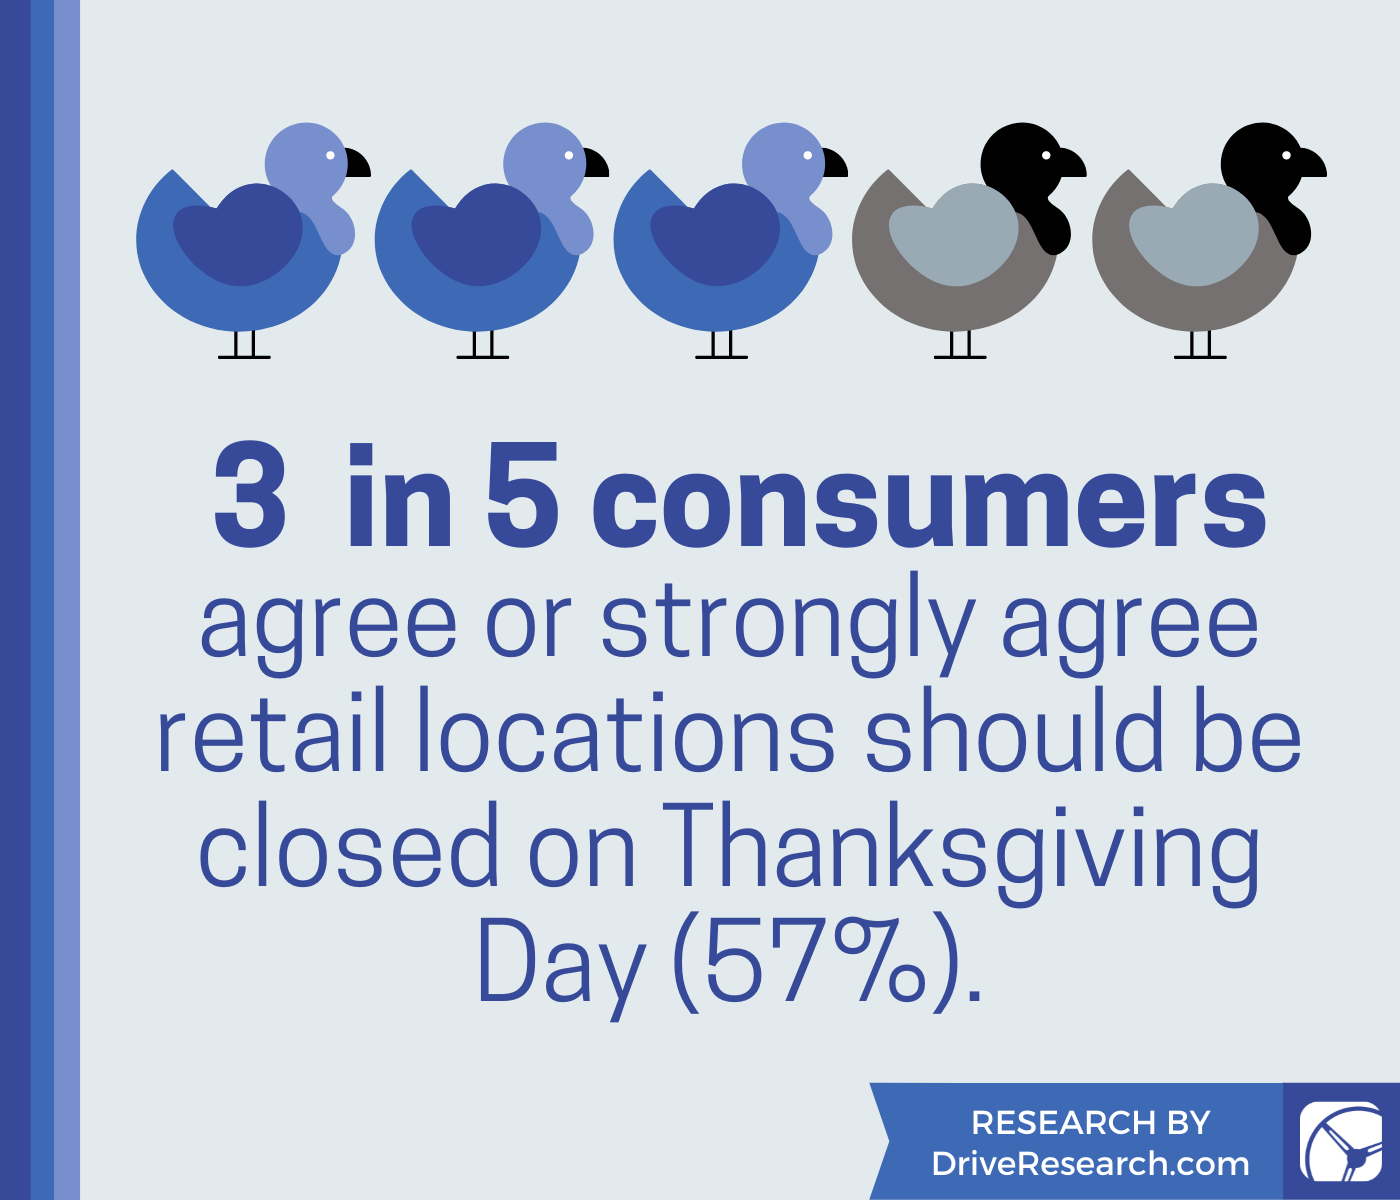 agree or strongly agree retail locations should be closed on Thanksgiving Day (57%).